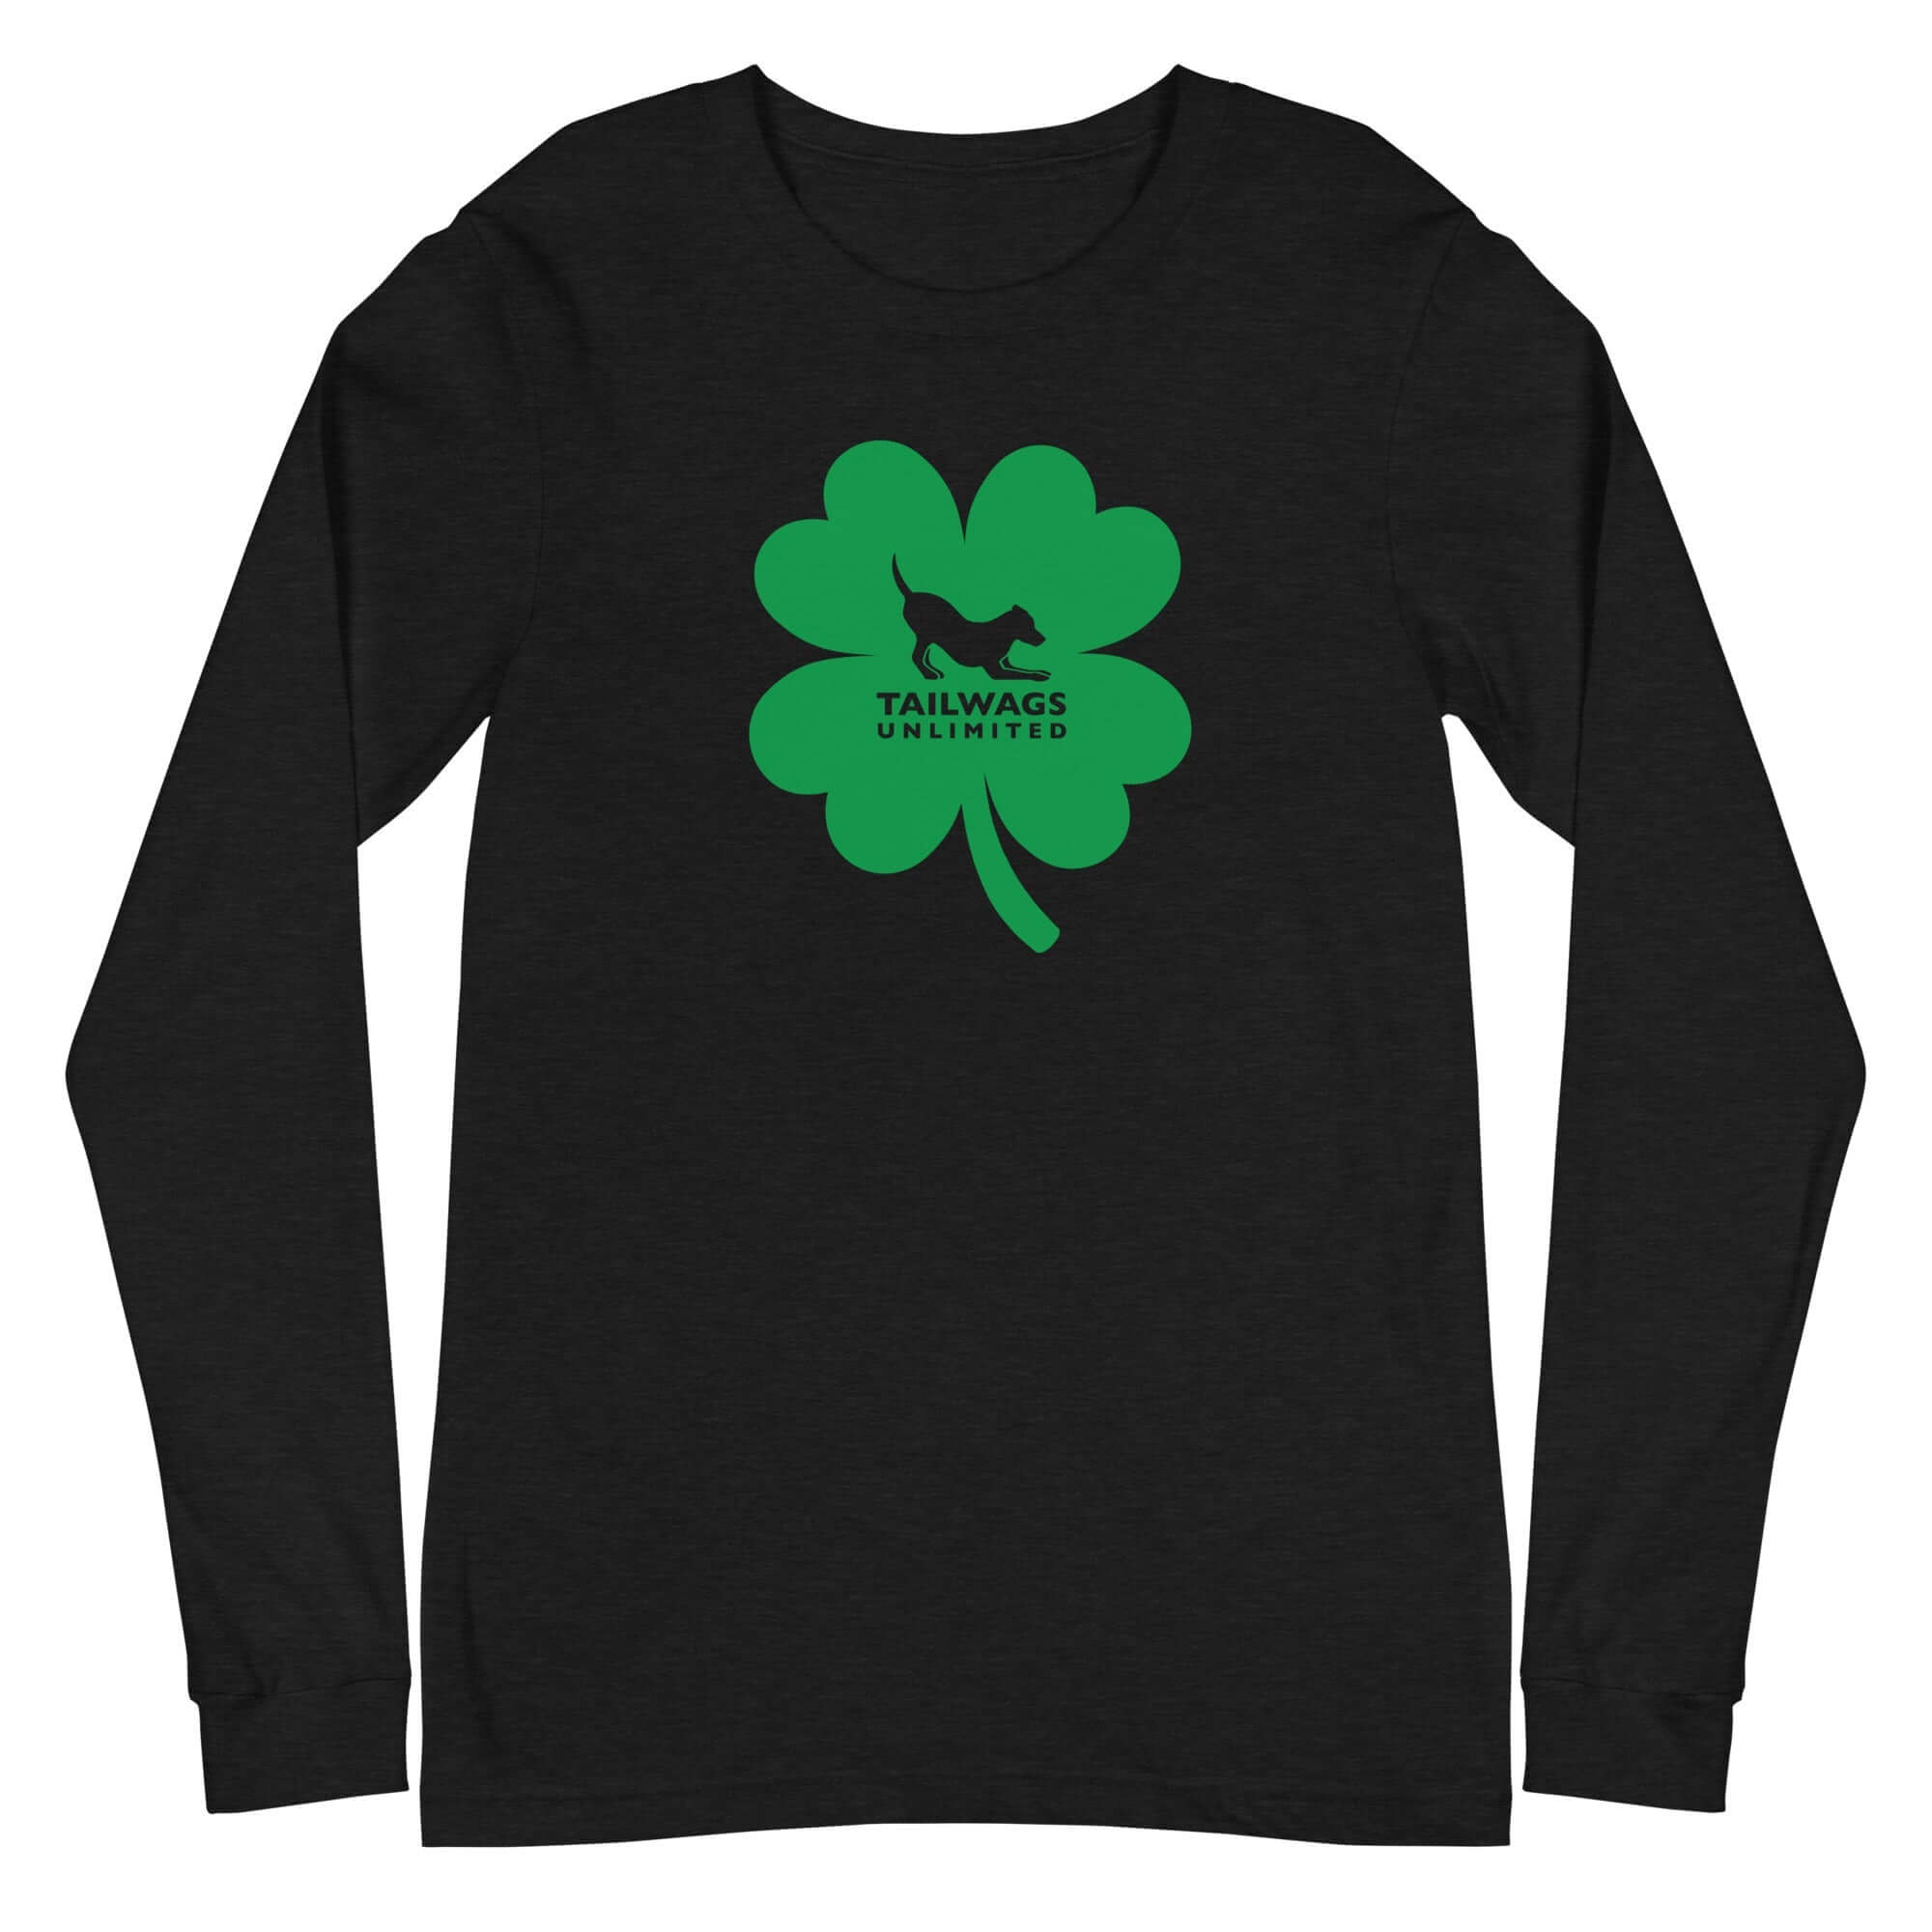 Green Four Leaf Clover Logo Long Sleeve Tee - TAILWAGS UNLIMITED